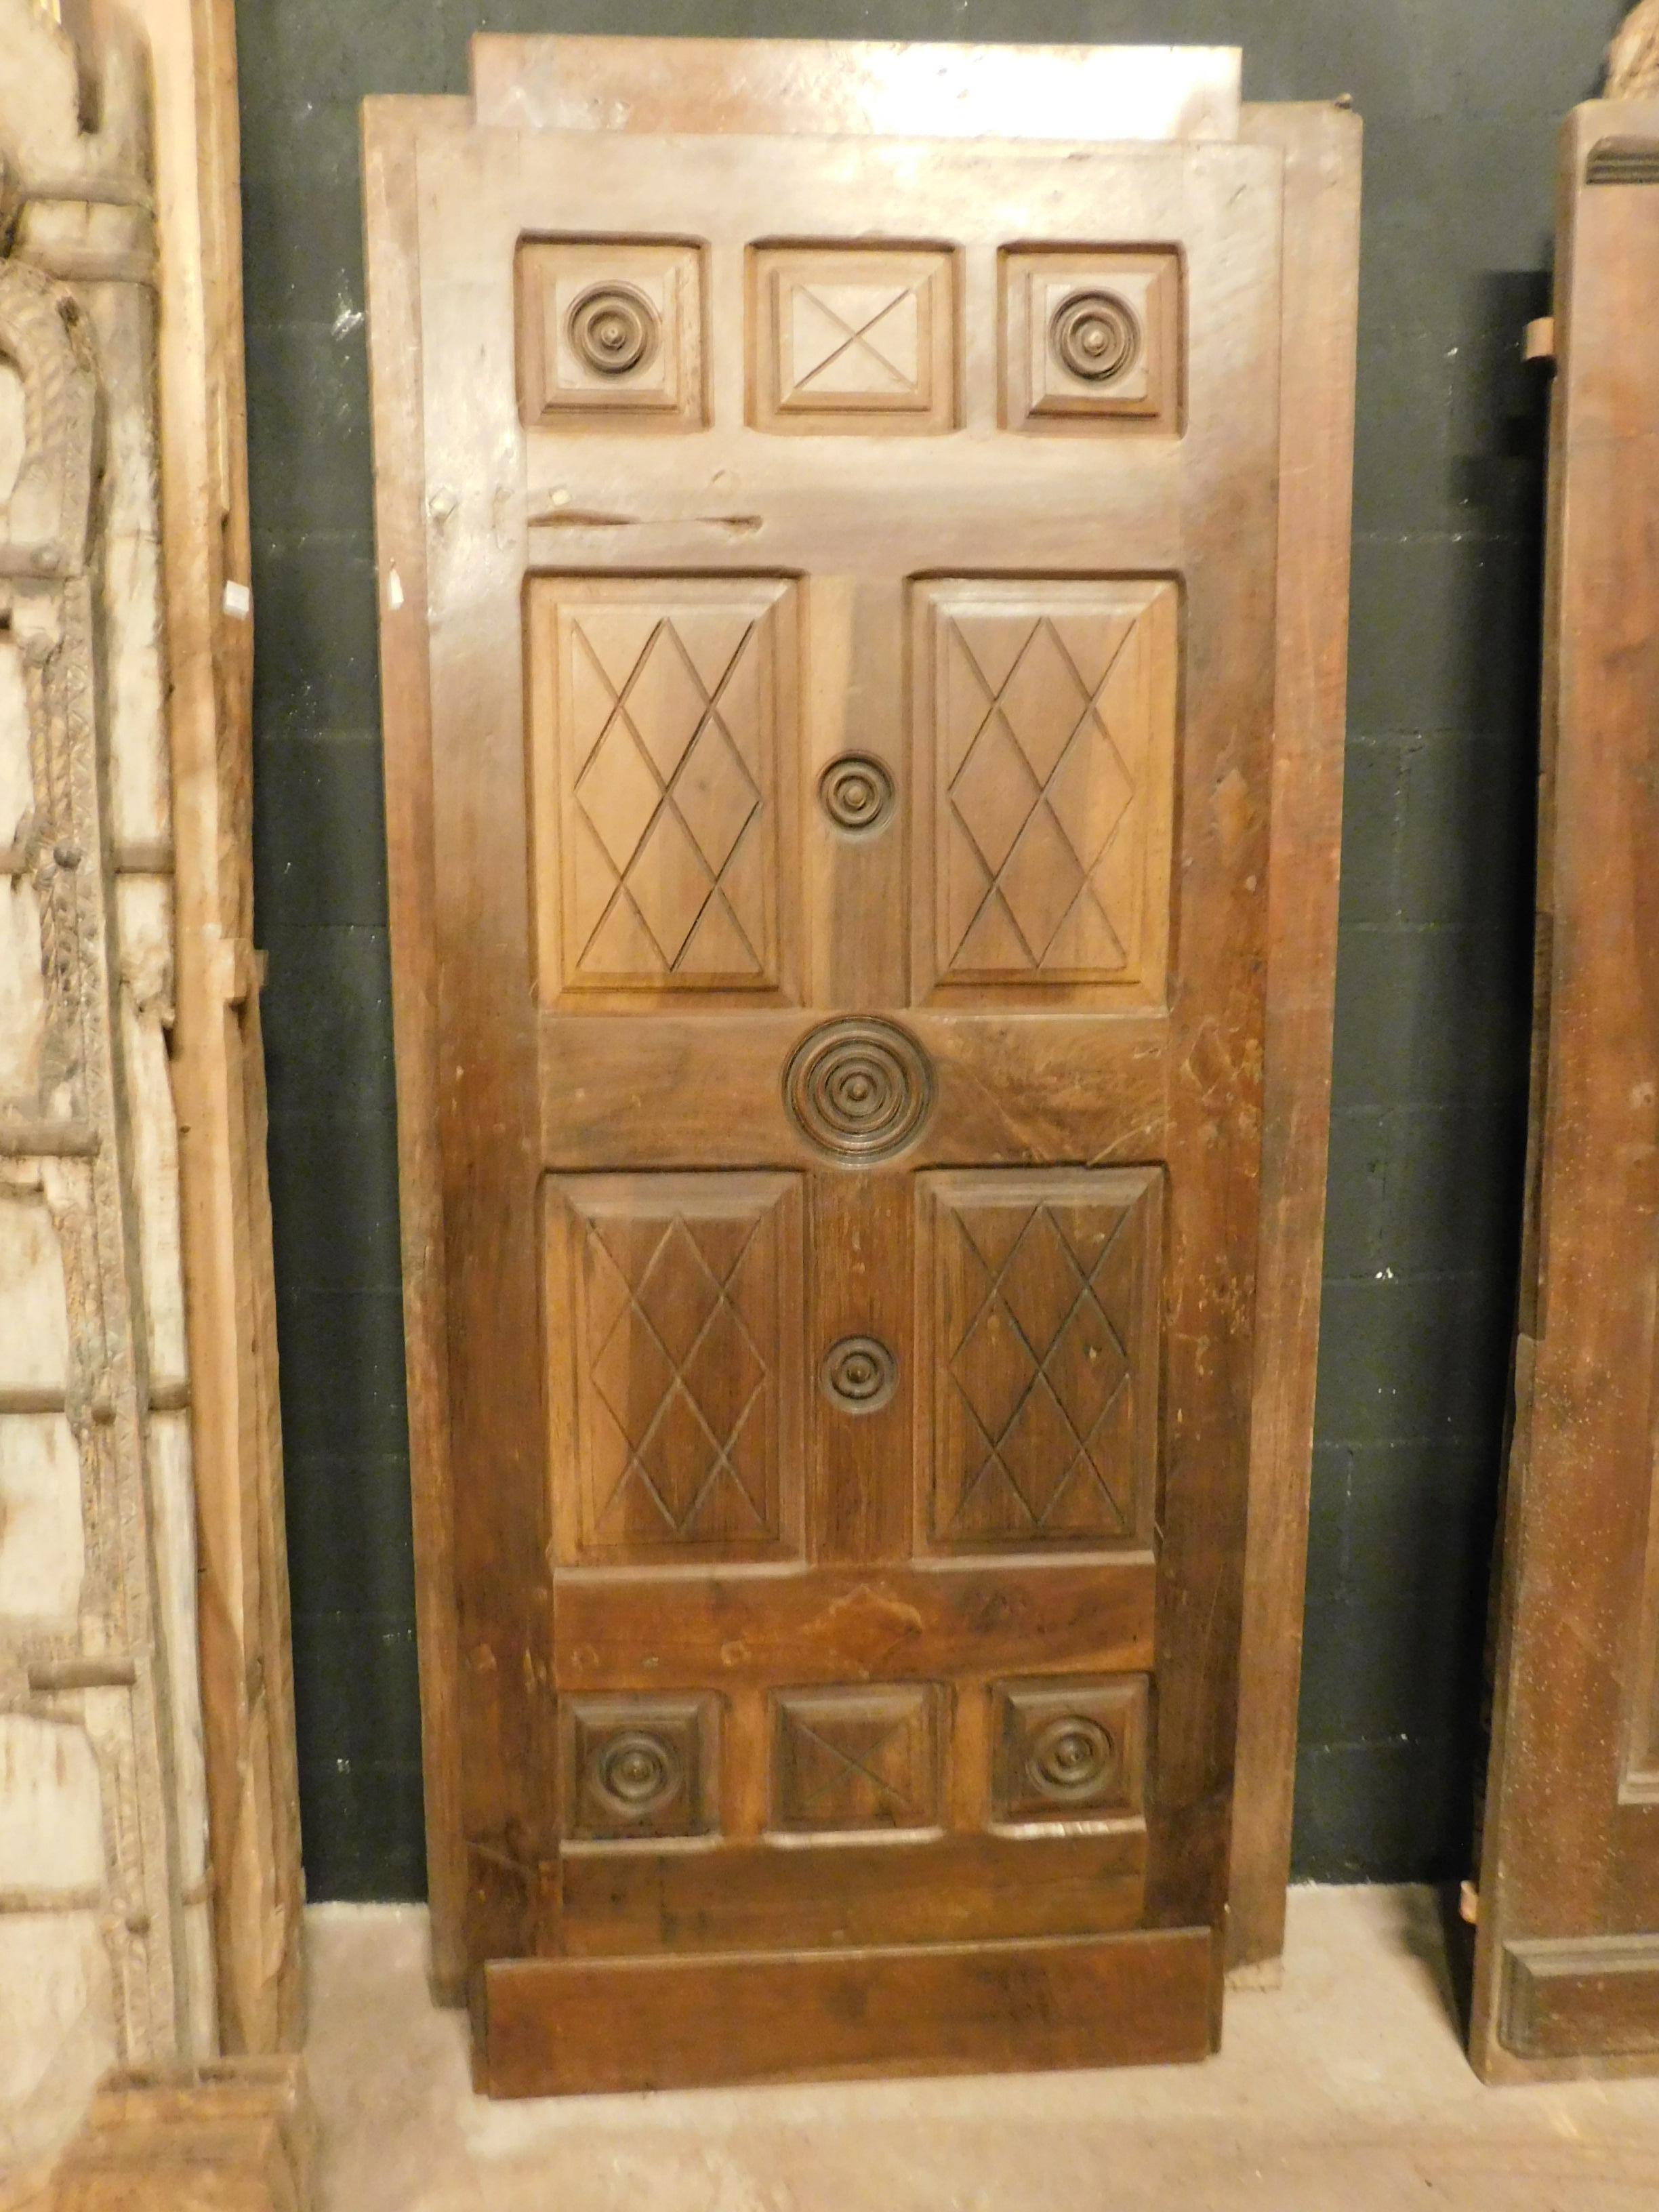 Antique single internal door, built in beautiful walnut with panels carved in geometric shapes of the time, built in the late 19th century for a noble palace.
Suitable for sliding or usable as a decorative panel, sold without frame as in the photo